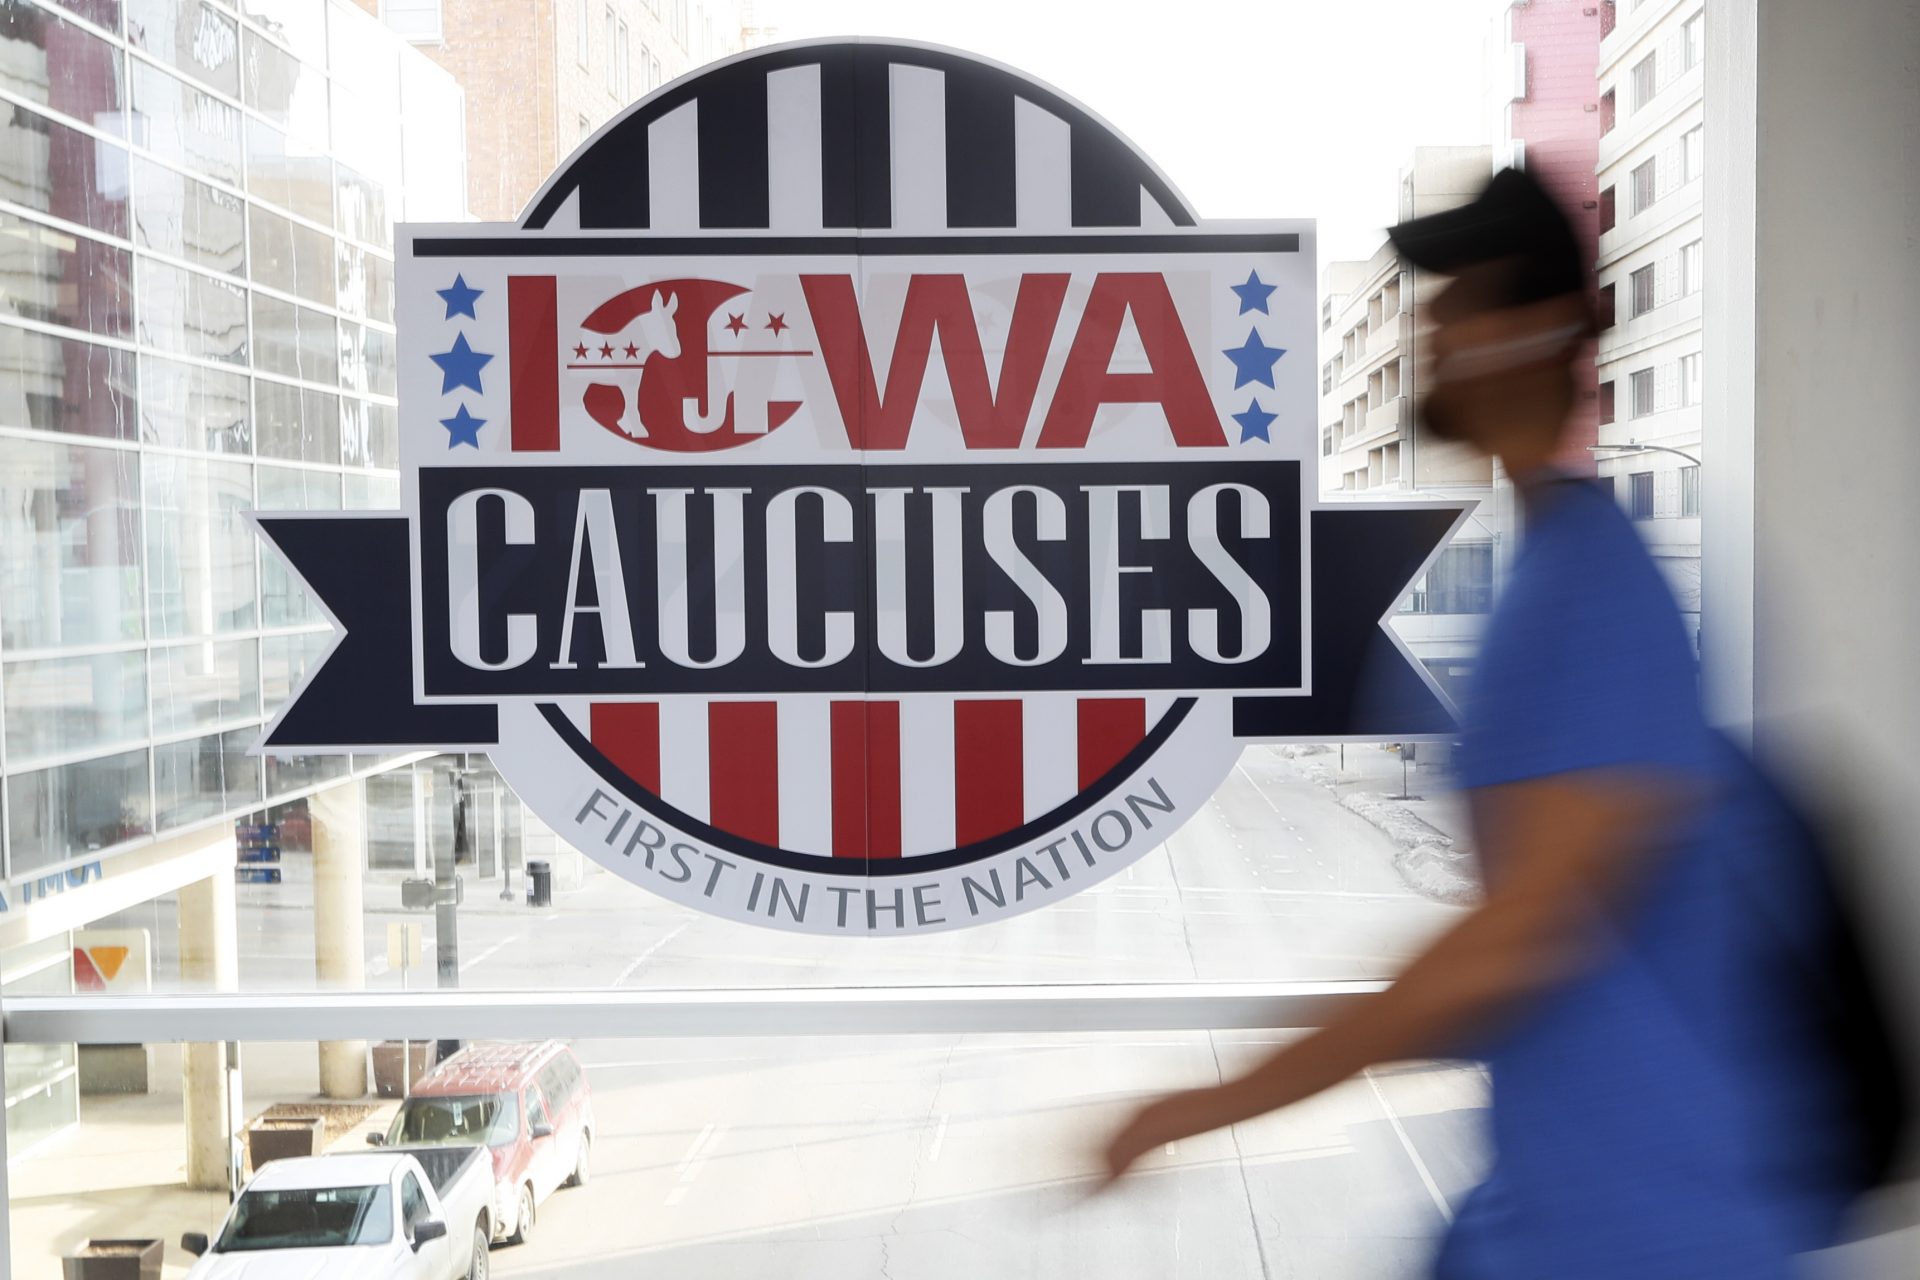 A pedestrian walks past a sign for the Iowa Caucuses on a downtown skywalk, Tuesday, Feb. 4, 2020, in Des Moines, Iowa.